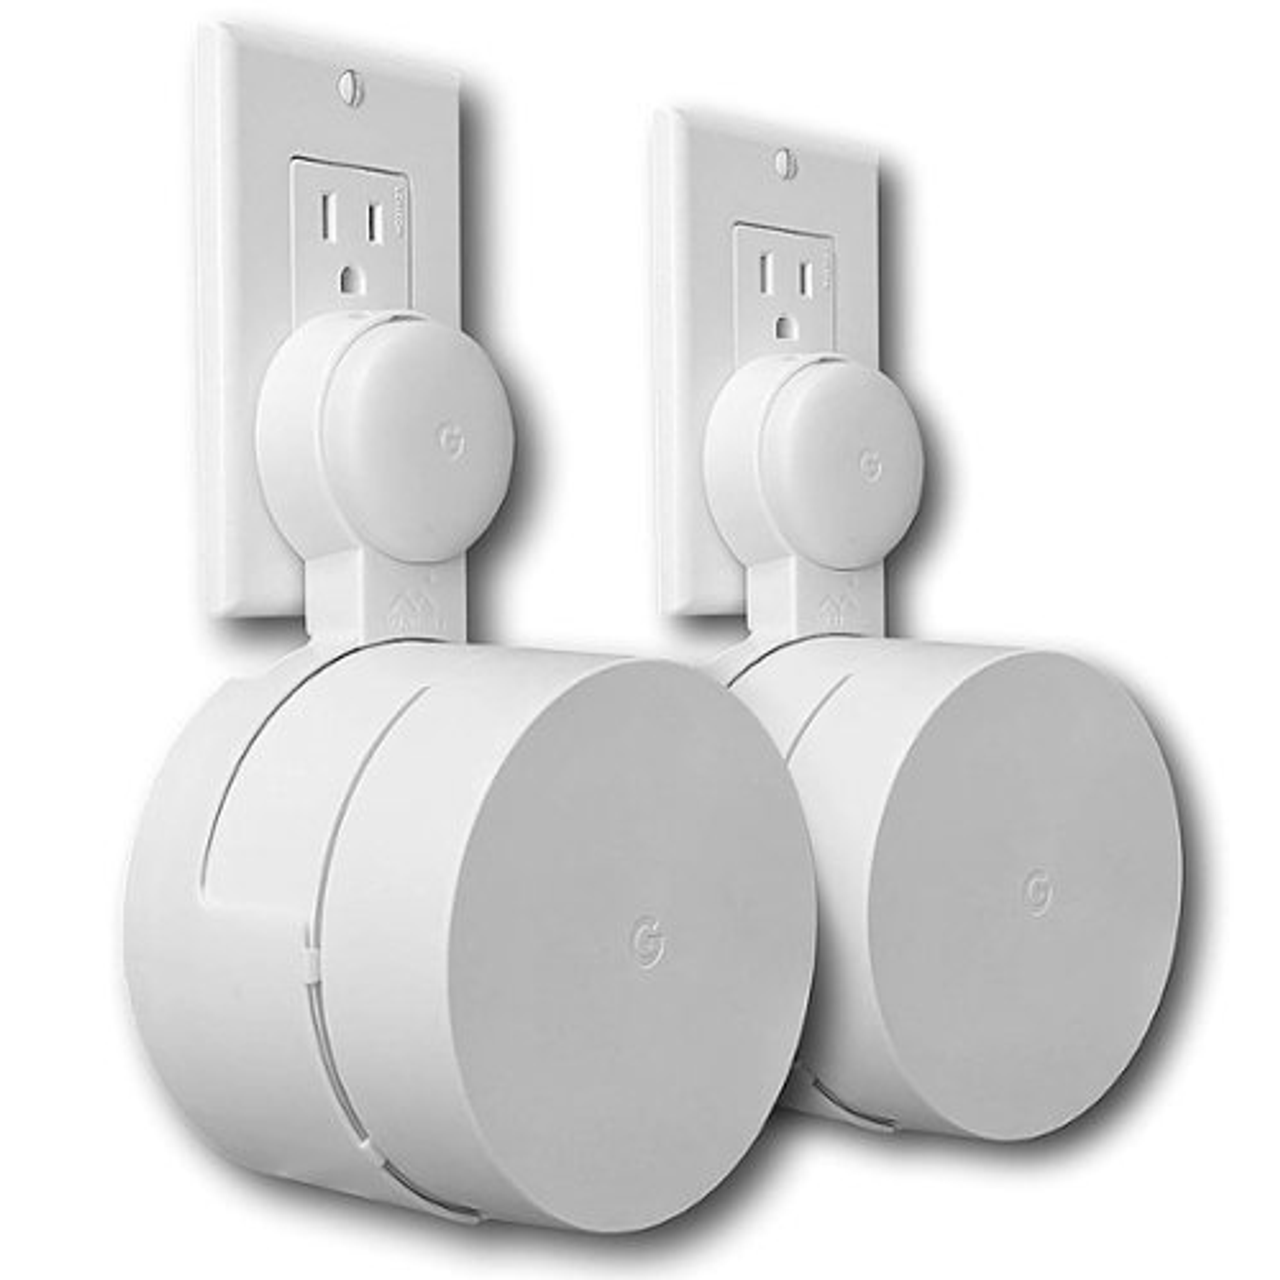 Mount Genie - Outlet Mount for Google Wifi AC1200 - Round Plug - 2-pack